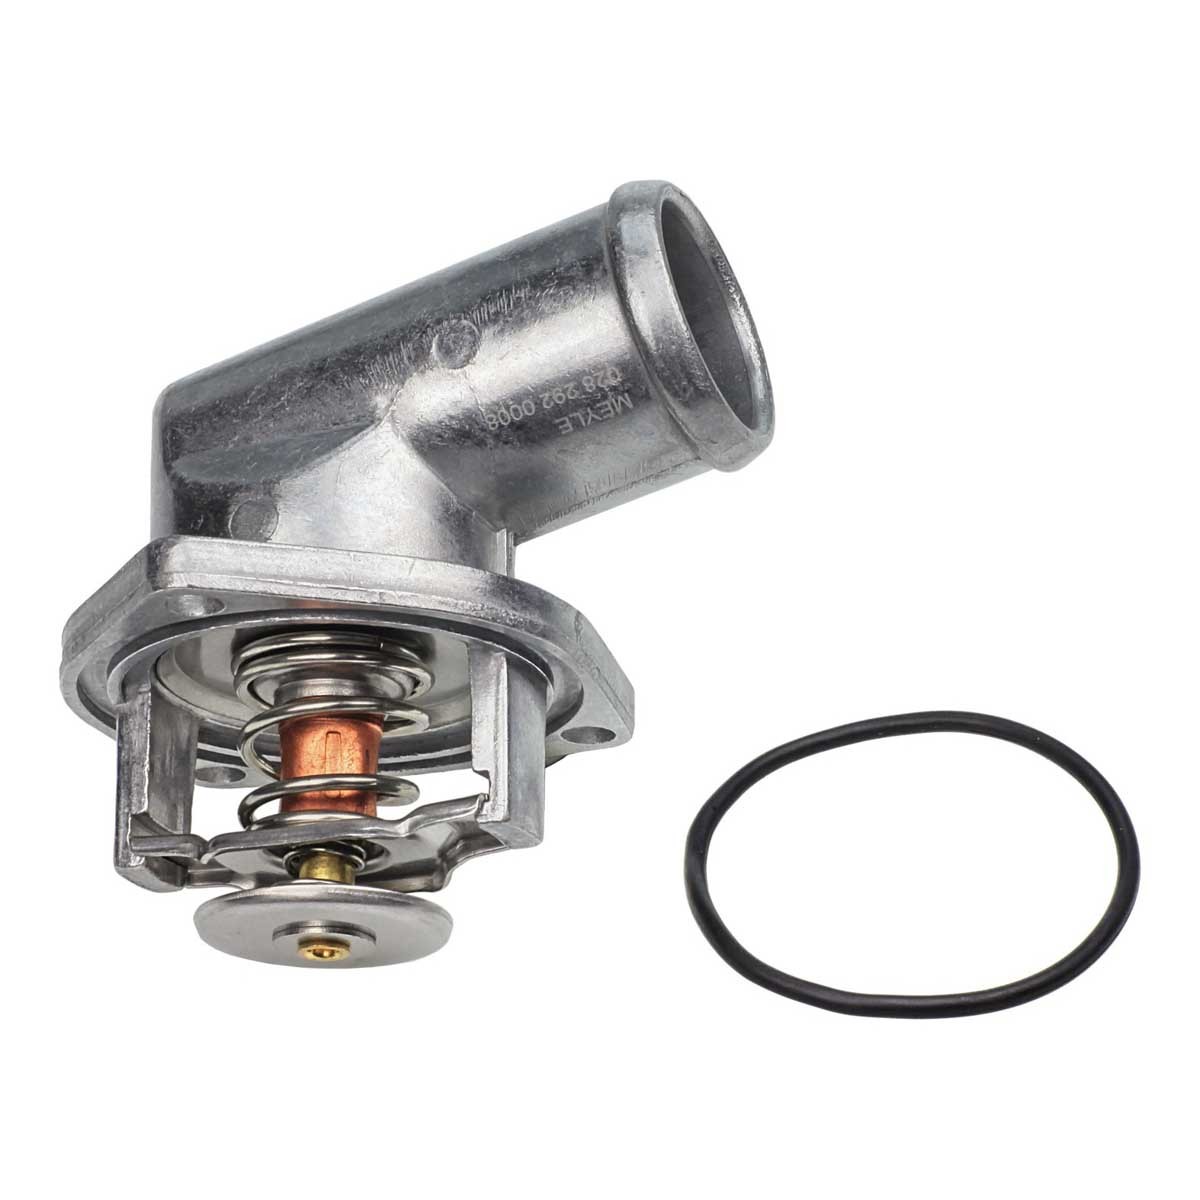 MEYLE 028 292 0008 Engine thermostat Opening Temperature: 92°C, ORIGINAL Quality, with seal, Metal Housing